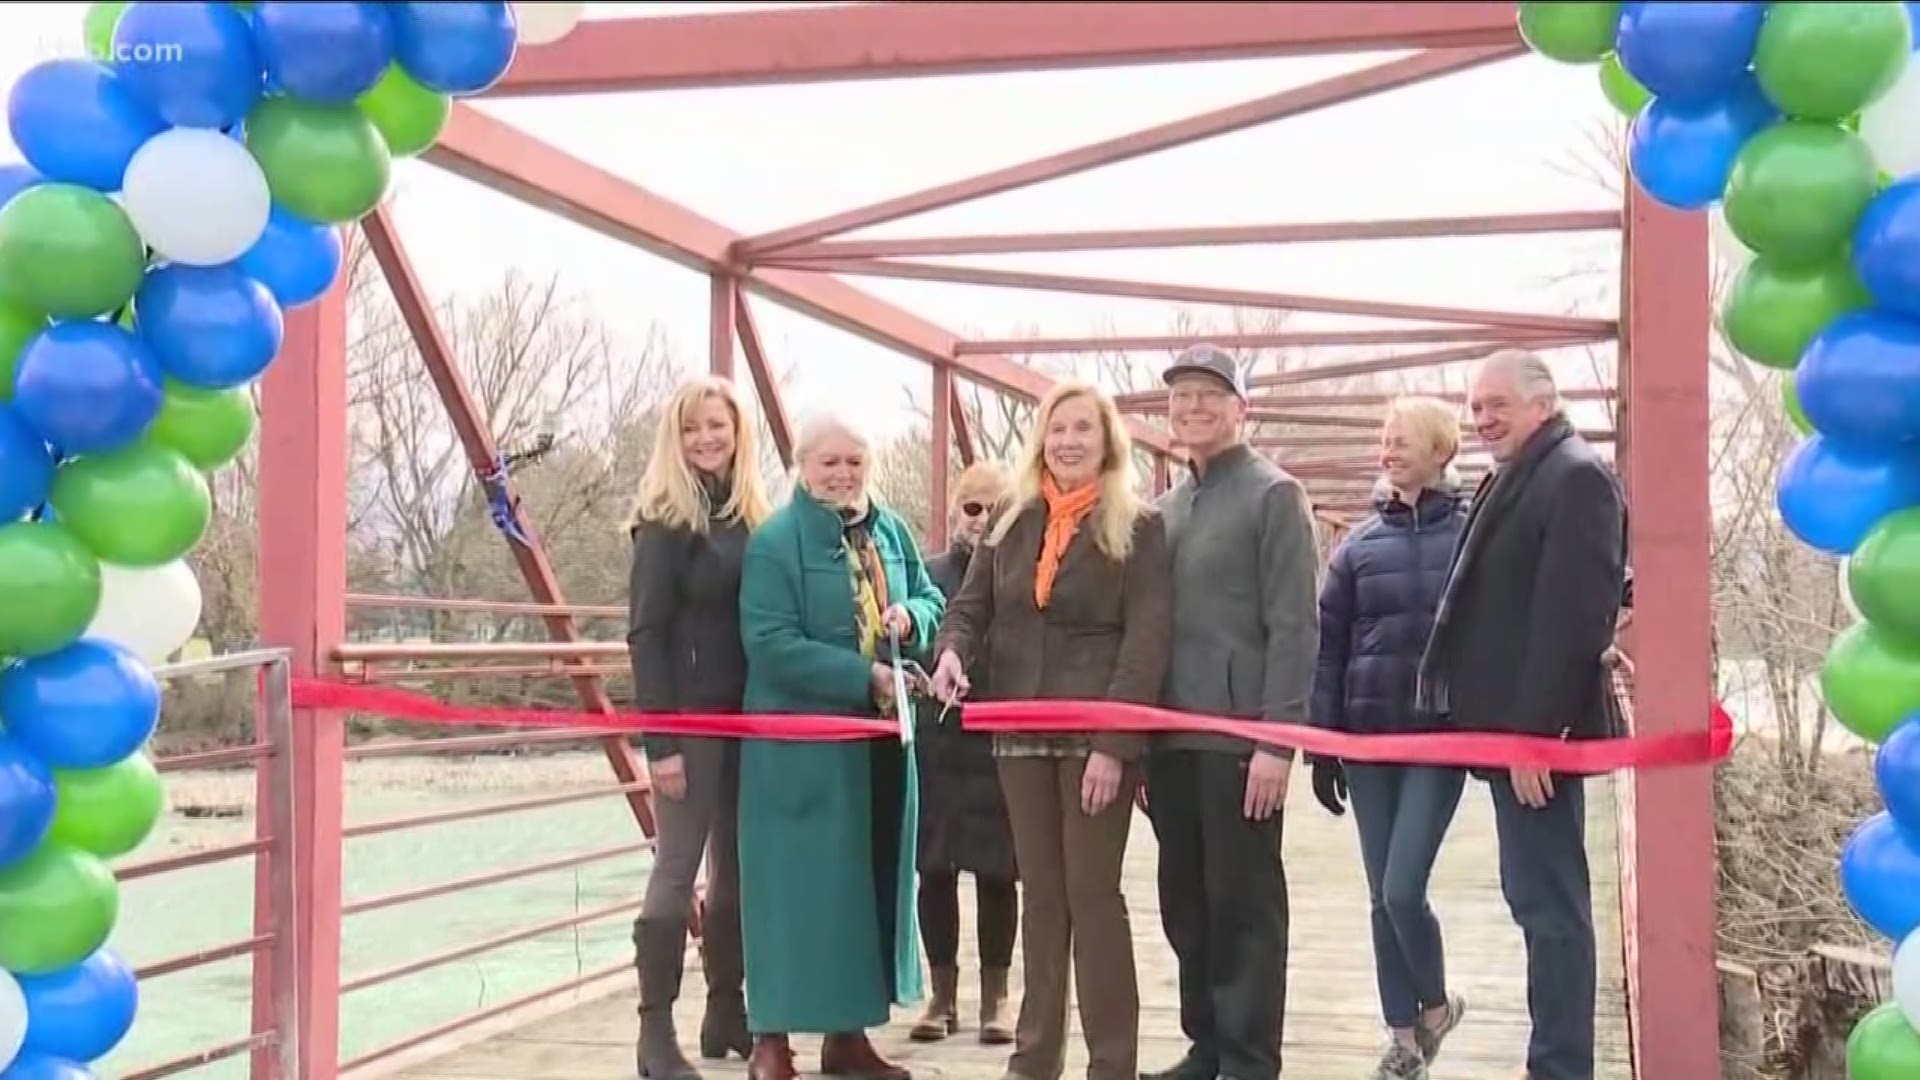 The popular path, linking the Garden City and Boise Greenbelt systems, was taken down due to flooding in 2017 and now the bridge is back into place.